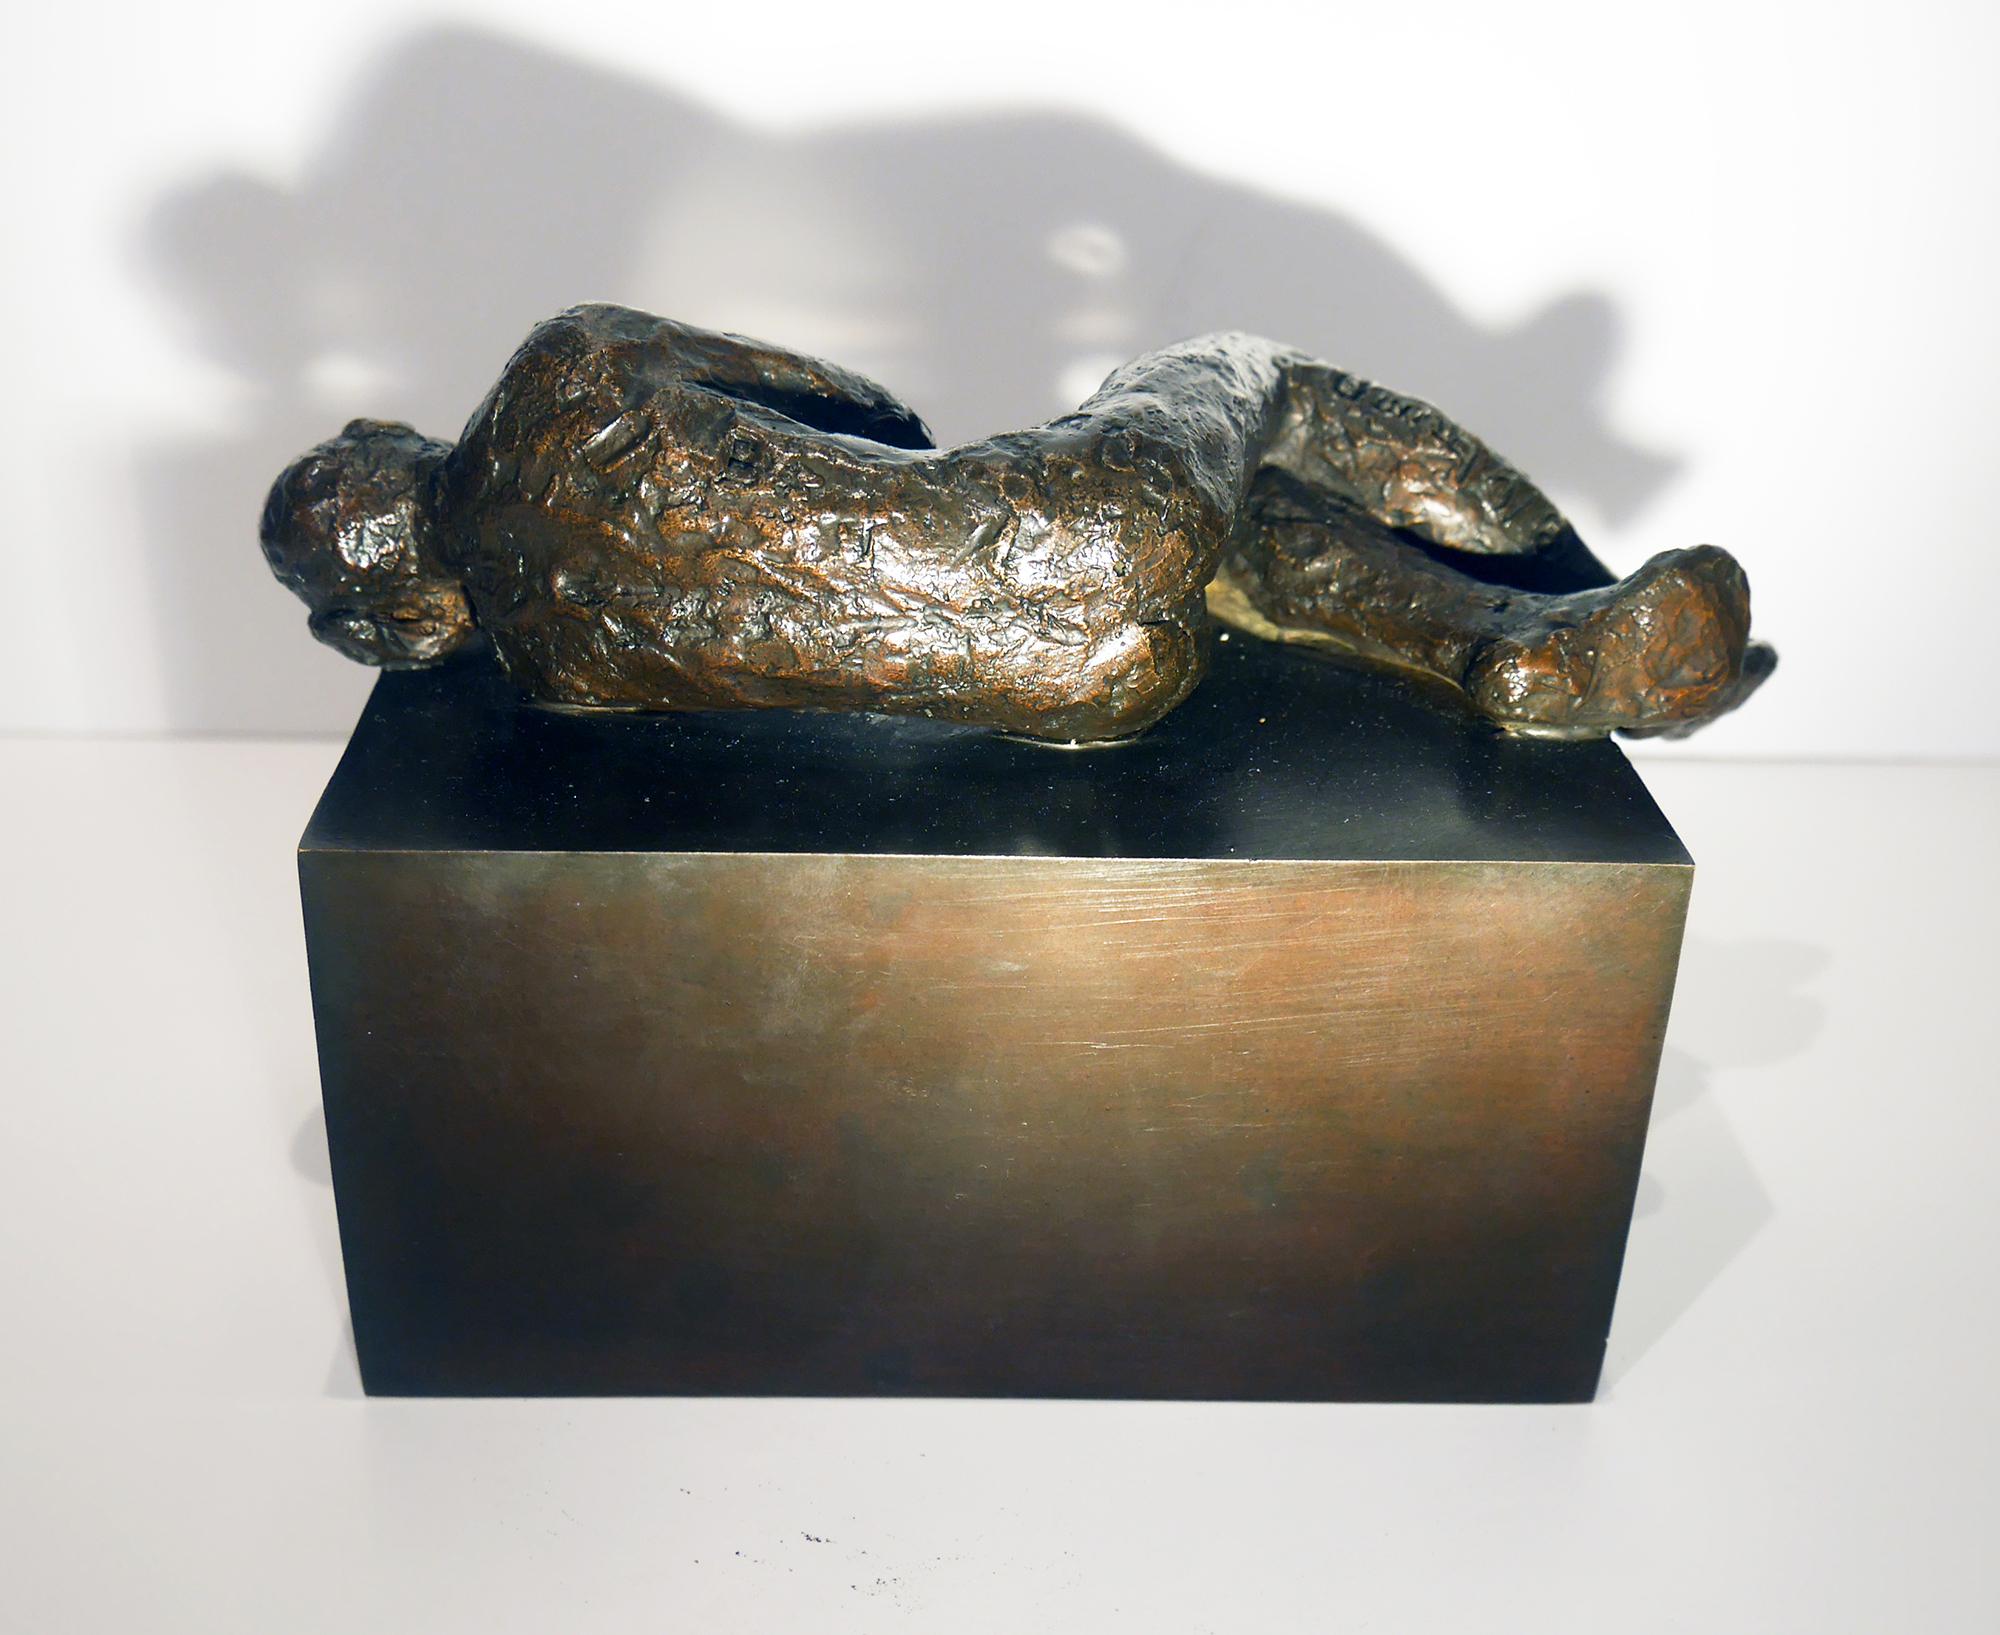 Le dormeur is a bronze by the French contemporary artist, Maguy Banq.
Edition 1/8.

The existentialism is in the center of Maguy Banq approach: the human being is predestined for nothing, he looks indefatigably for his purpose, for his reason for